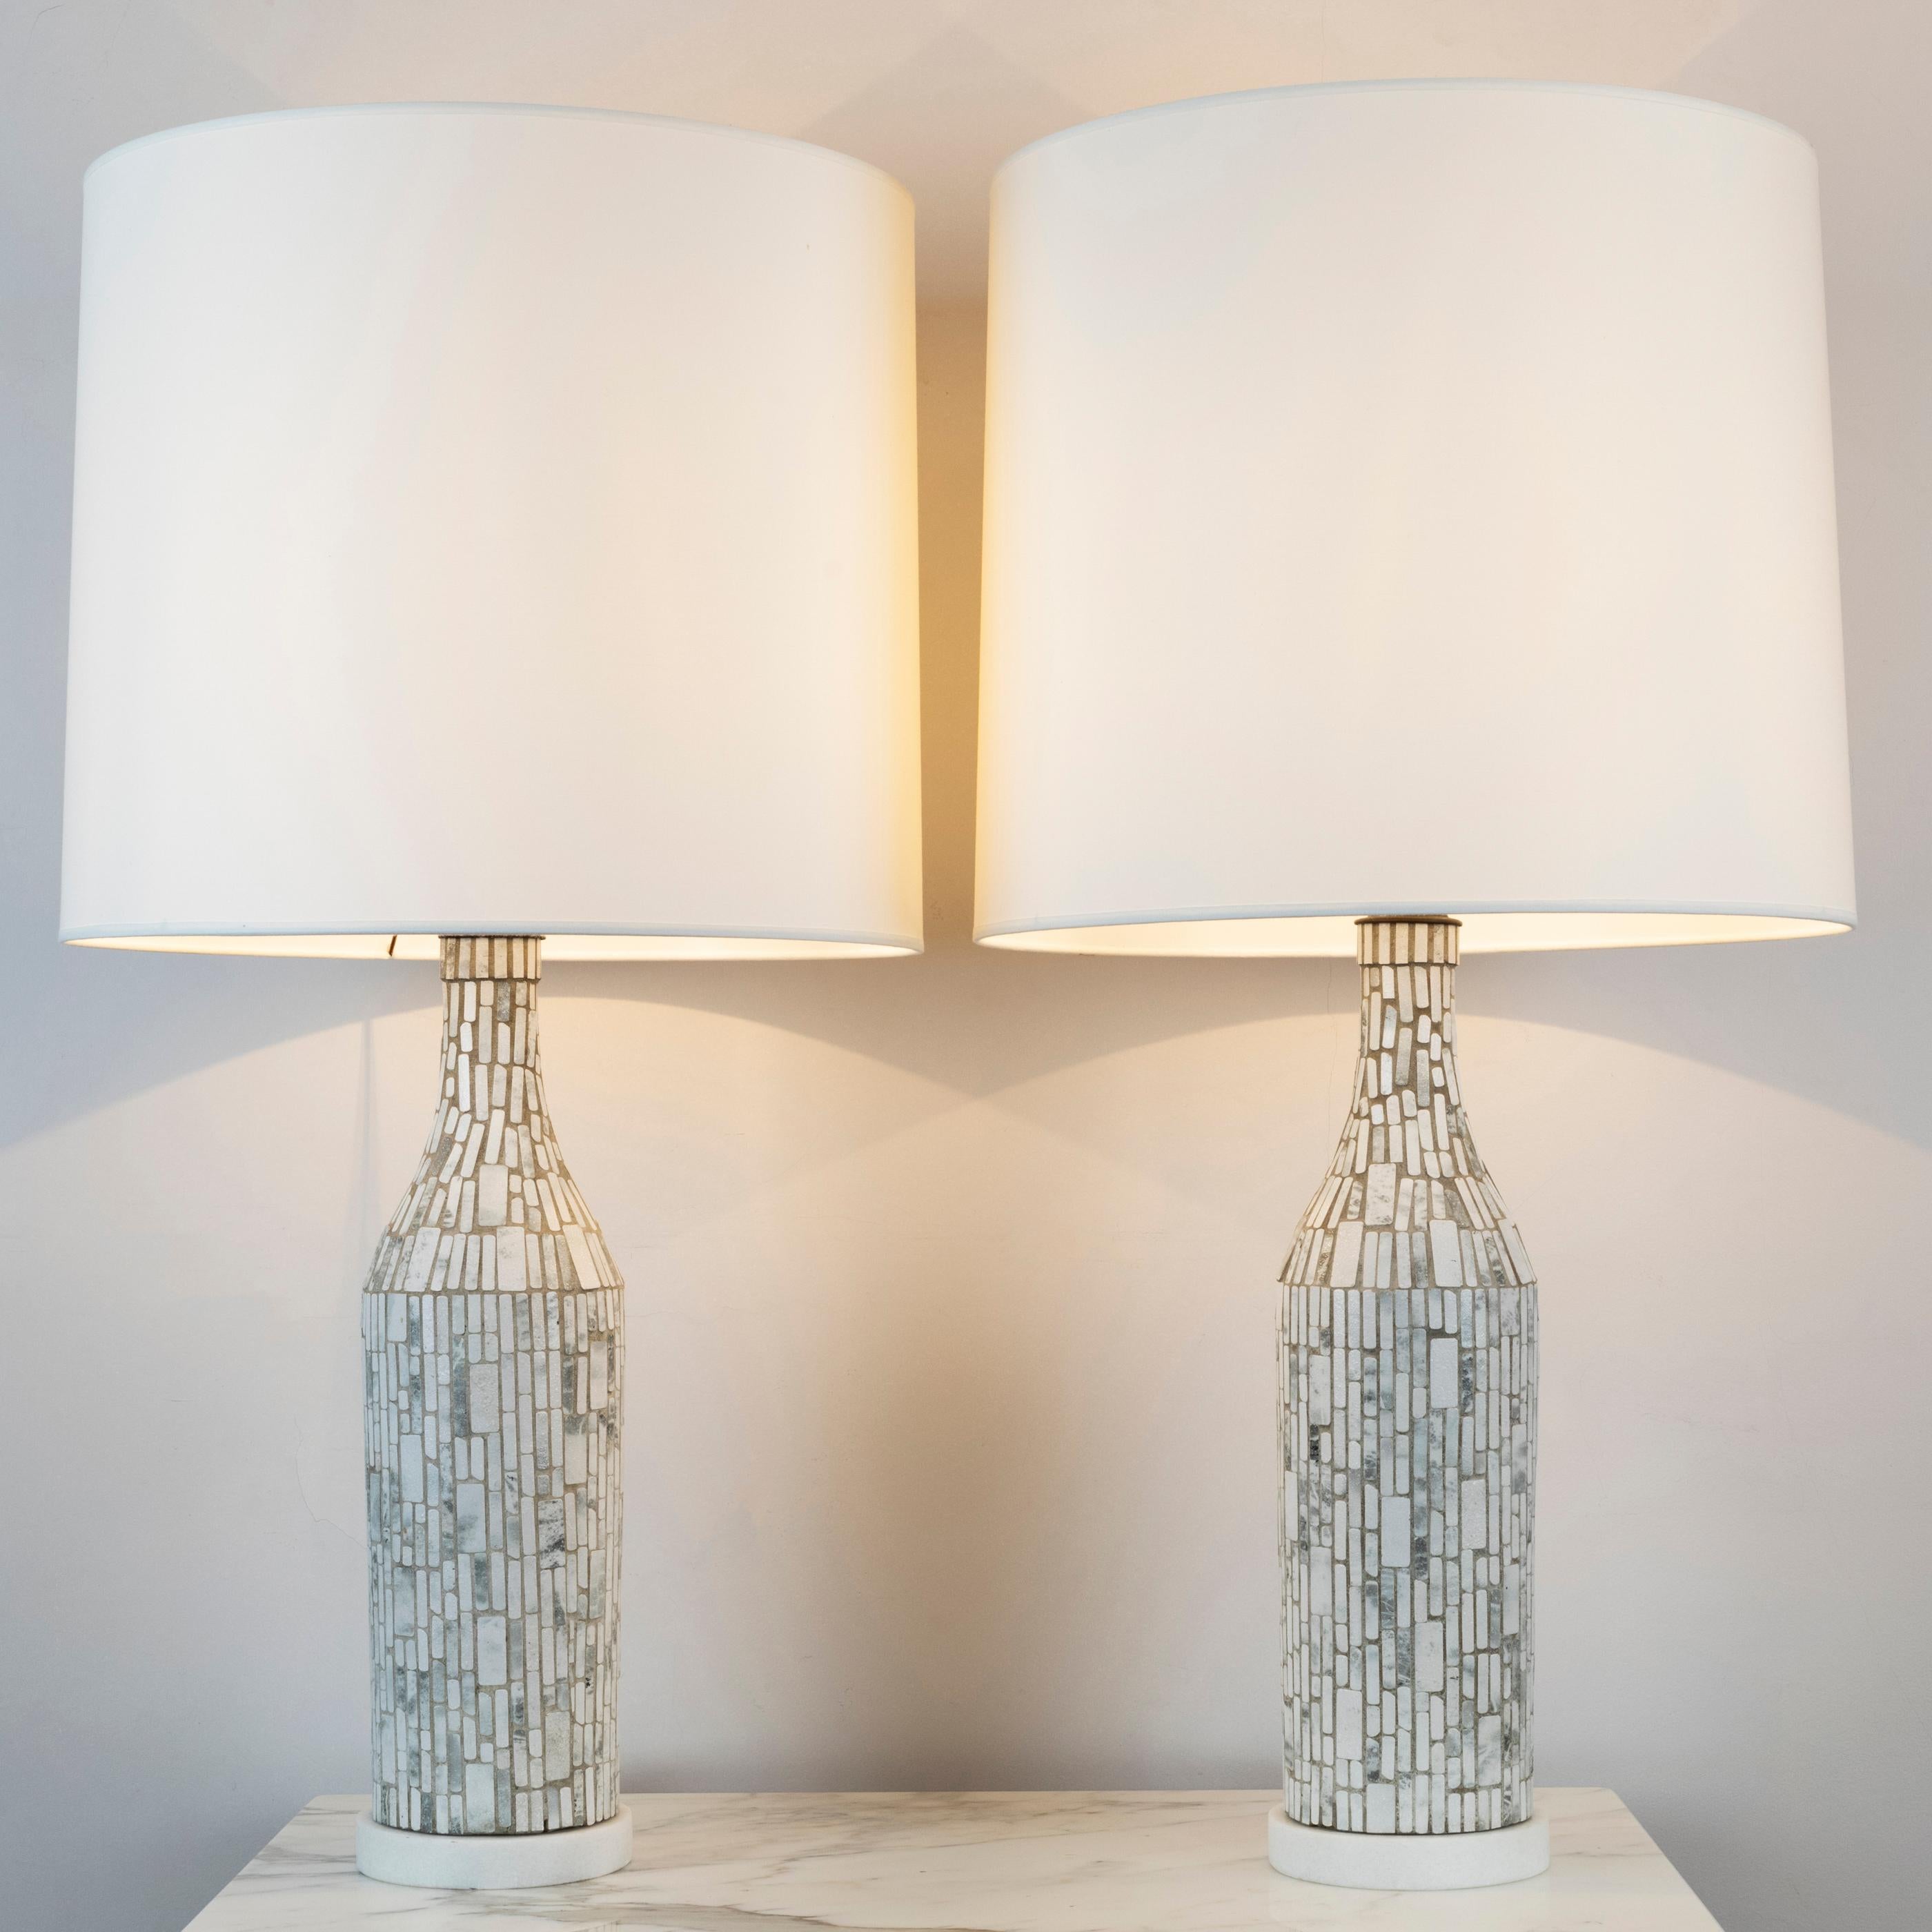 Pair of “Mosaic” table lamps
The body is made in ceramic mosaic, on a marble base.
France, circa 1950.

Measures: Height 37 in. (94 cm) 
Diameter 18.1 in. (46 cm)

Height base 20.5 in. (52 cm) 
Diameter base 5.9 in. (15 cm).